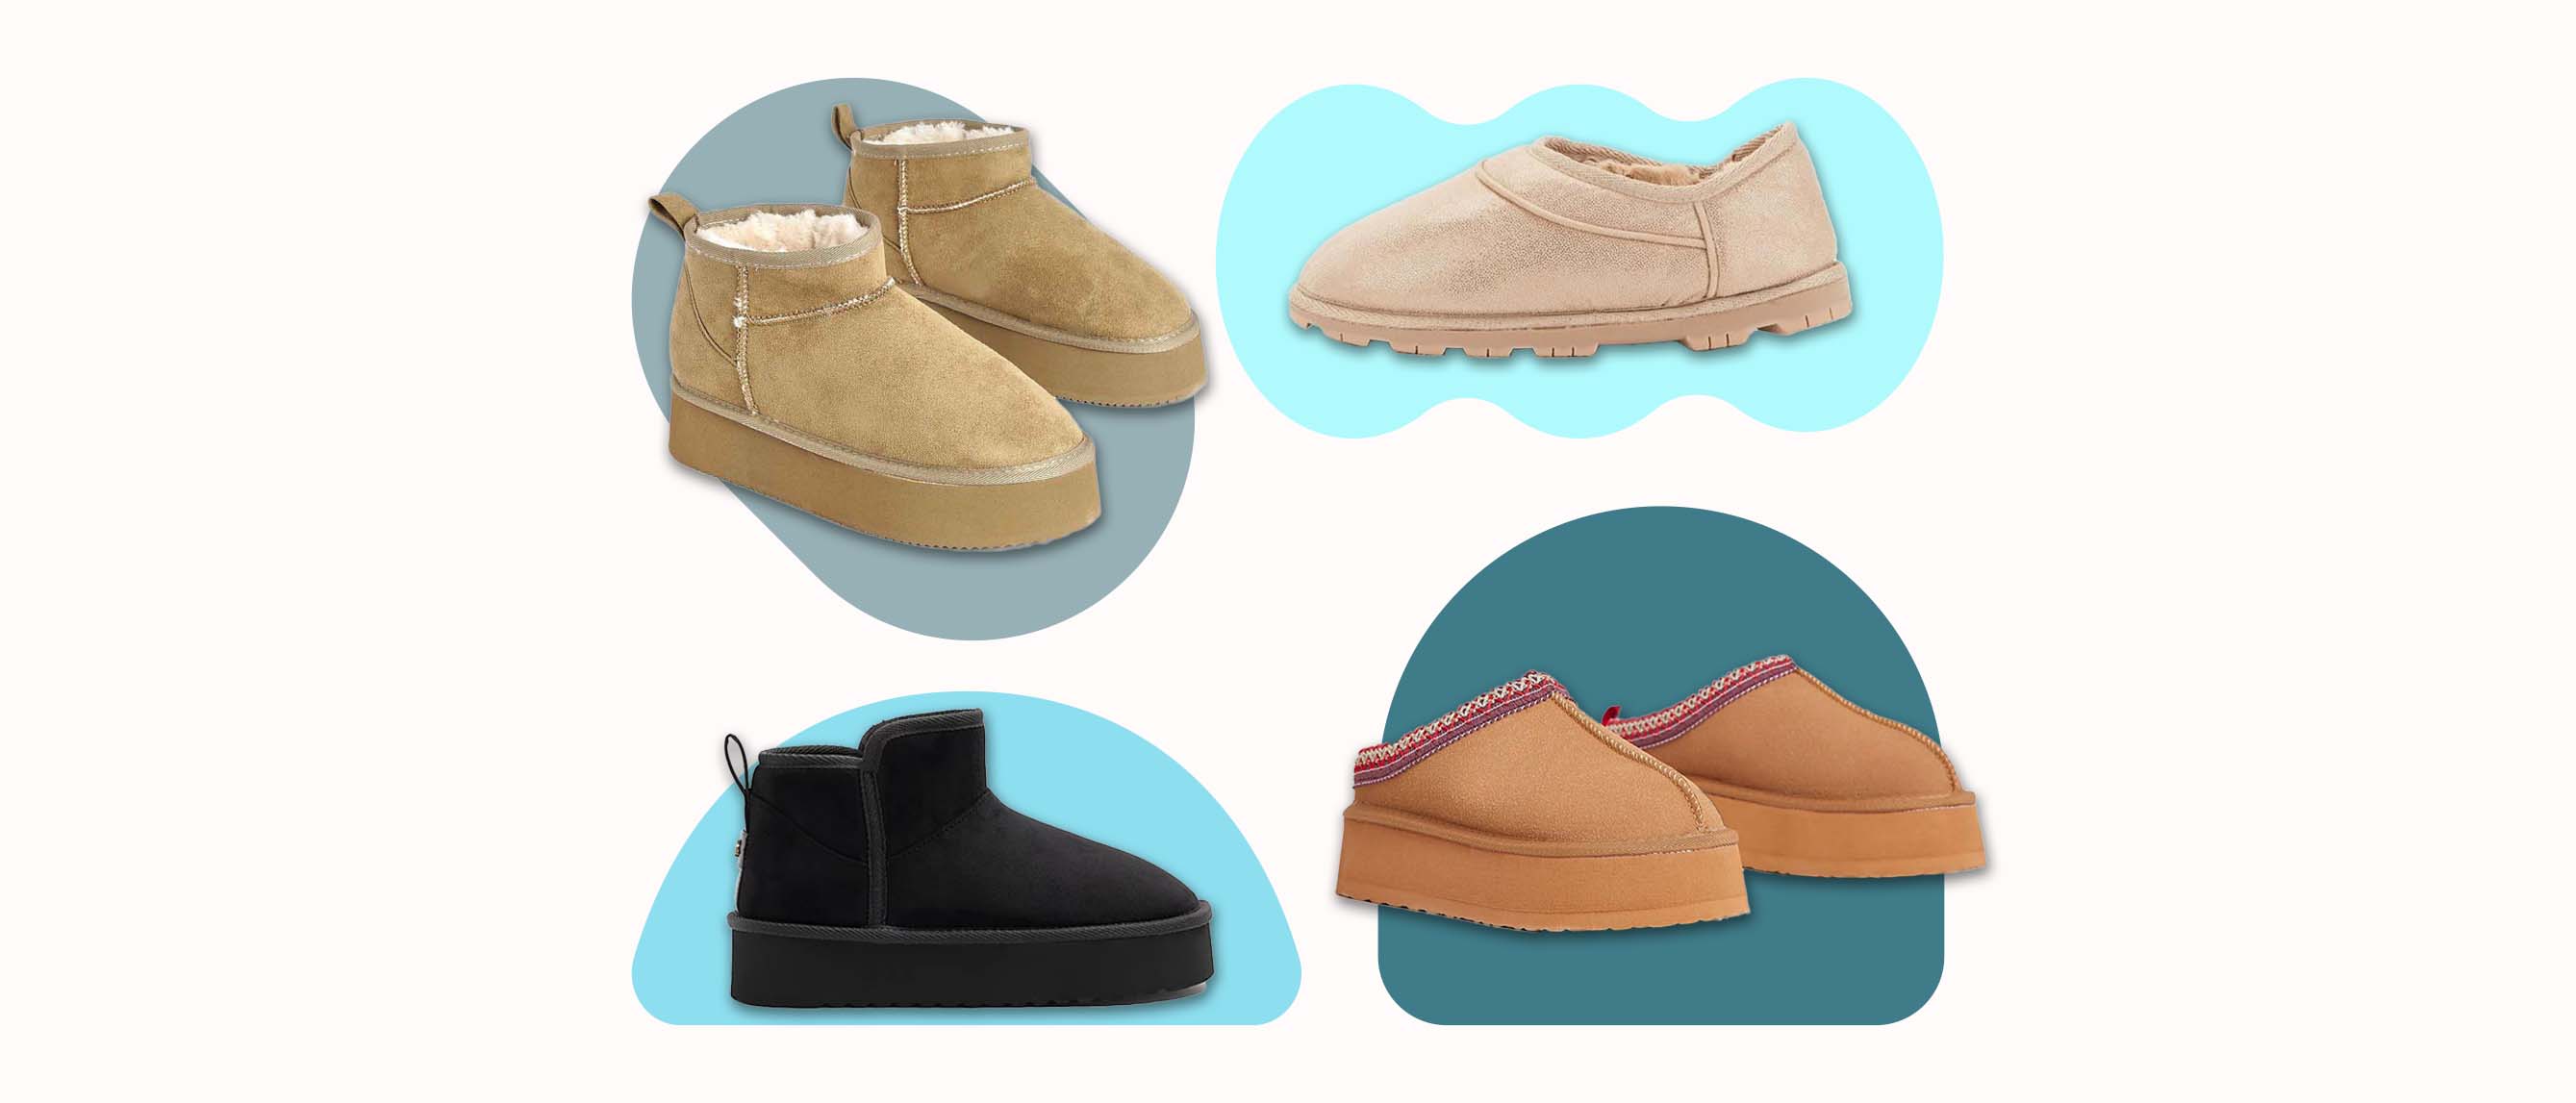 UGG Boots, Slippers and Shoes - Reviews